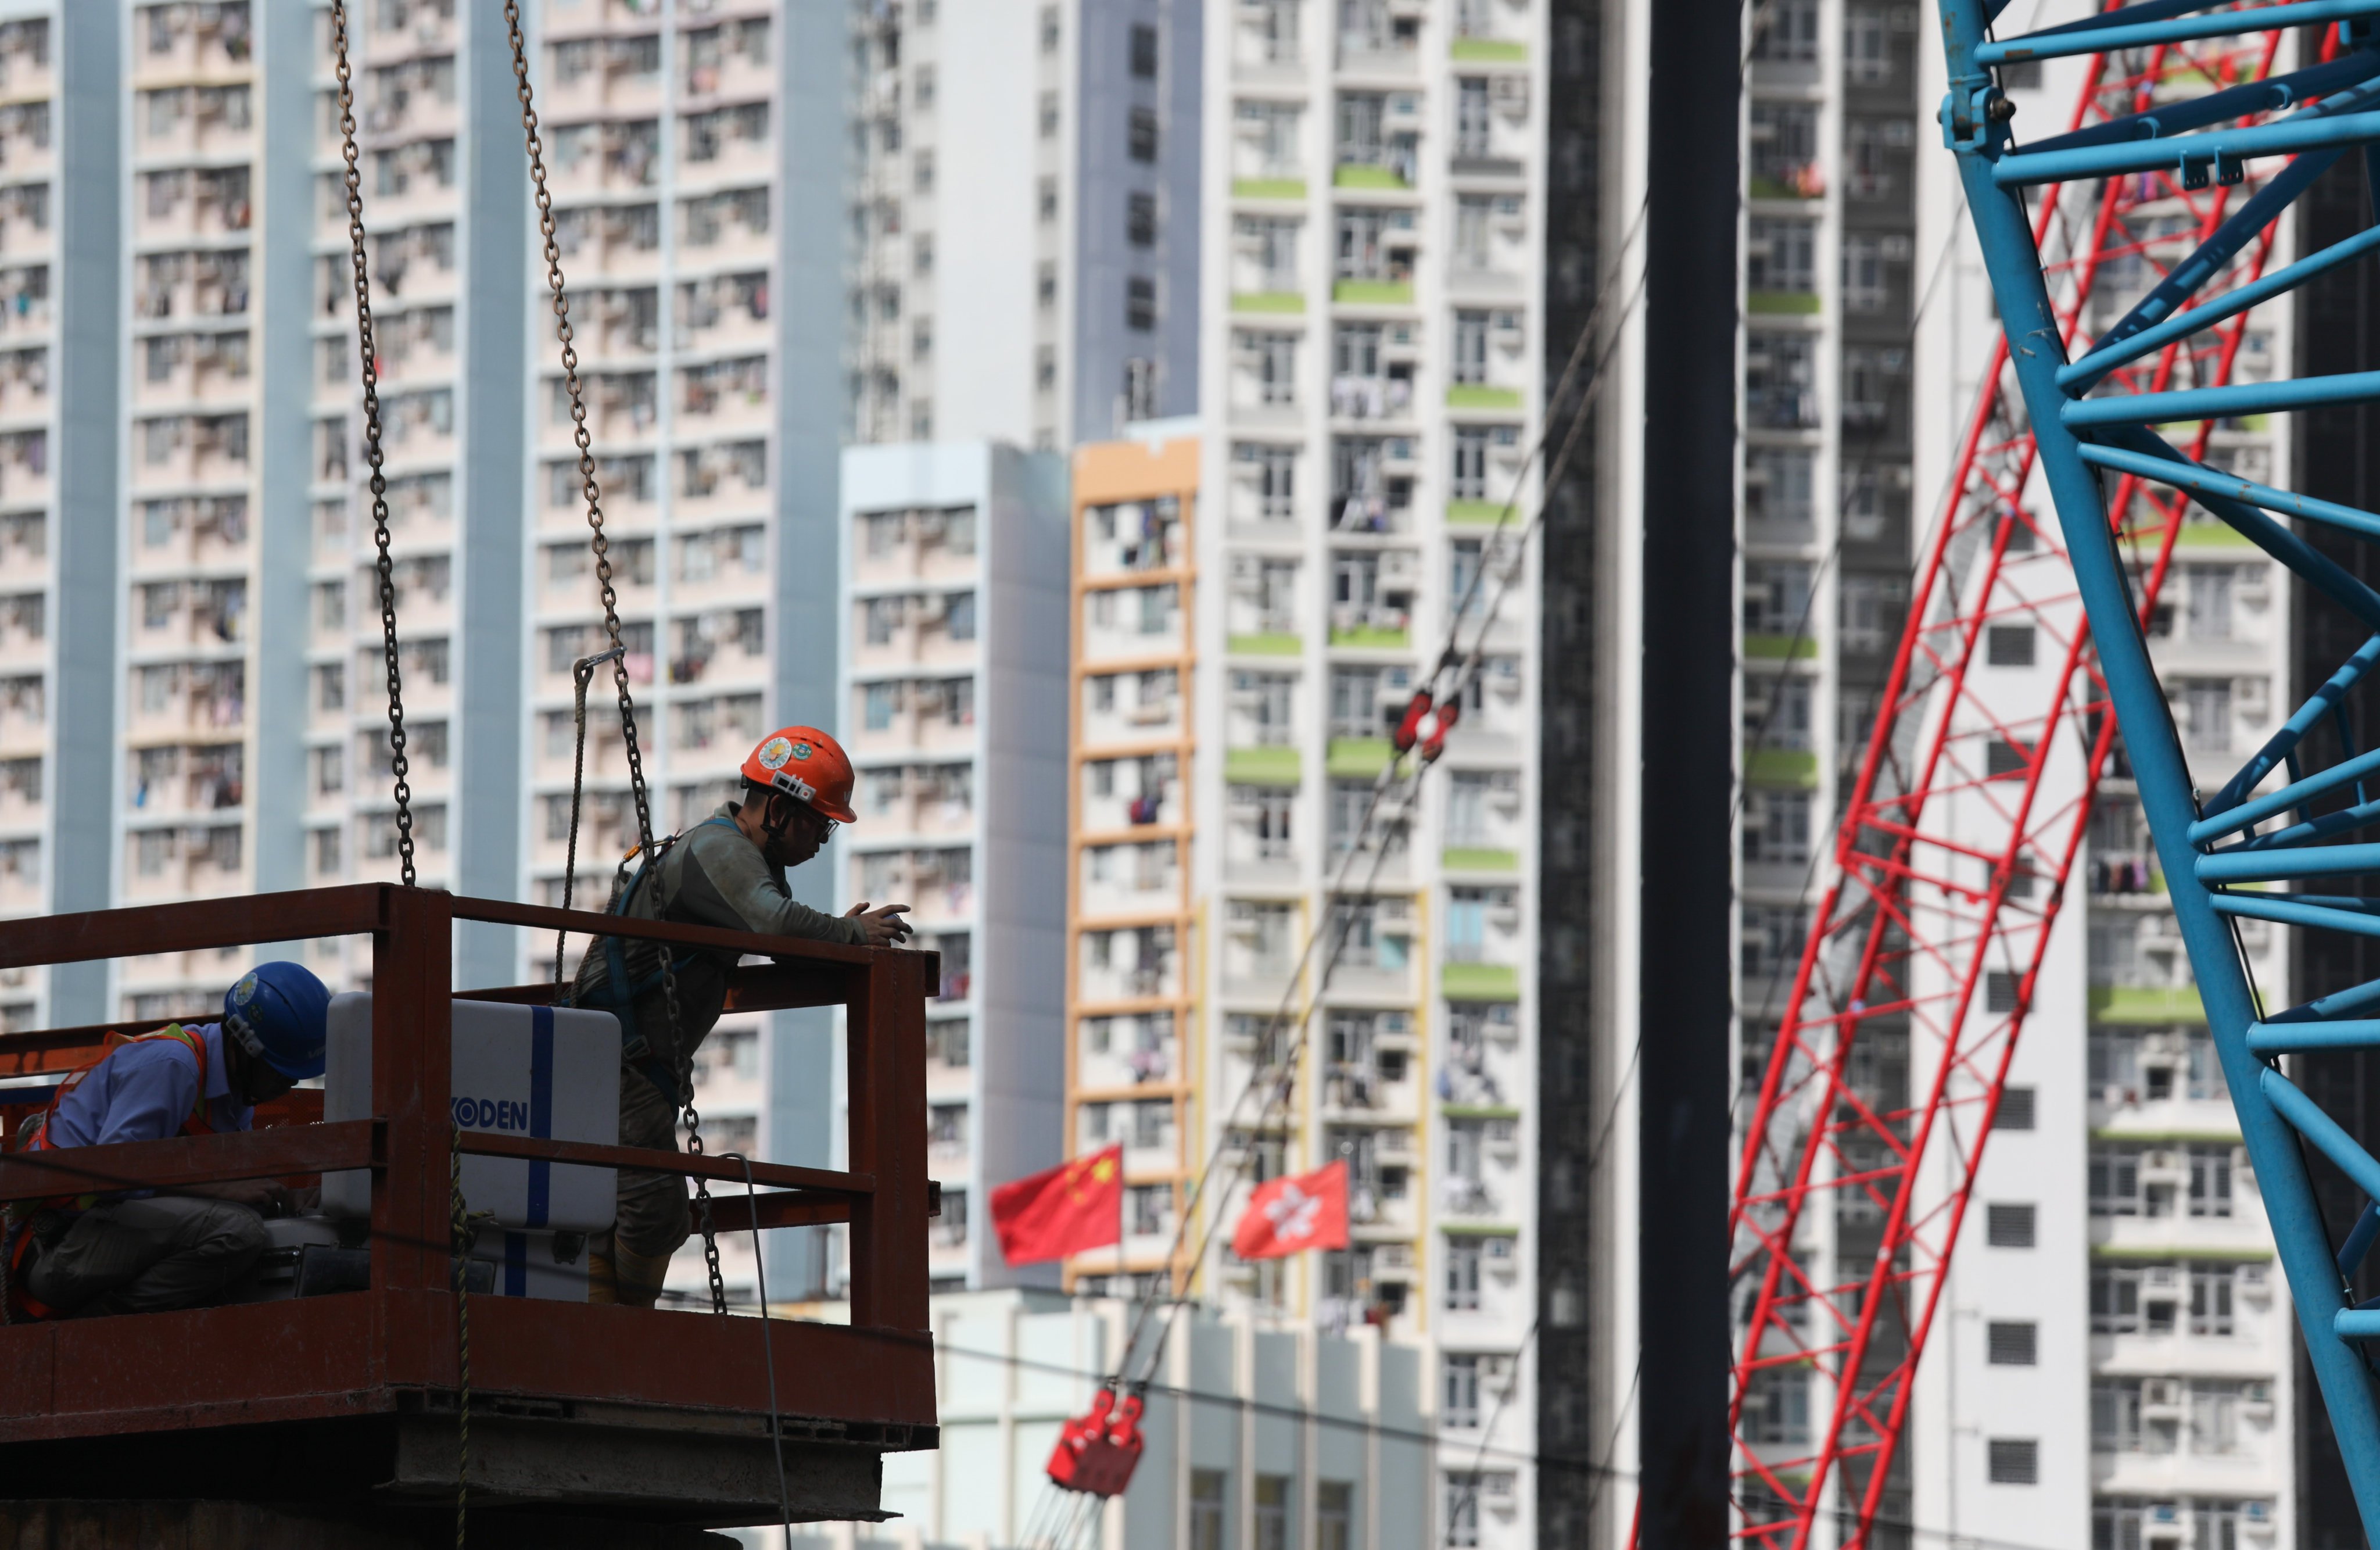 Workers at a public housing construction site in Cheung Sha Wan. Hong Kong’s construction industry has been plagued by rising accidents in recent years. Photo: Xiaomei Chen